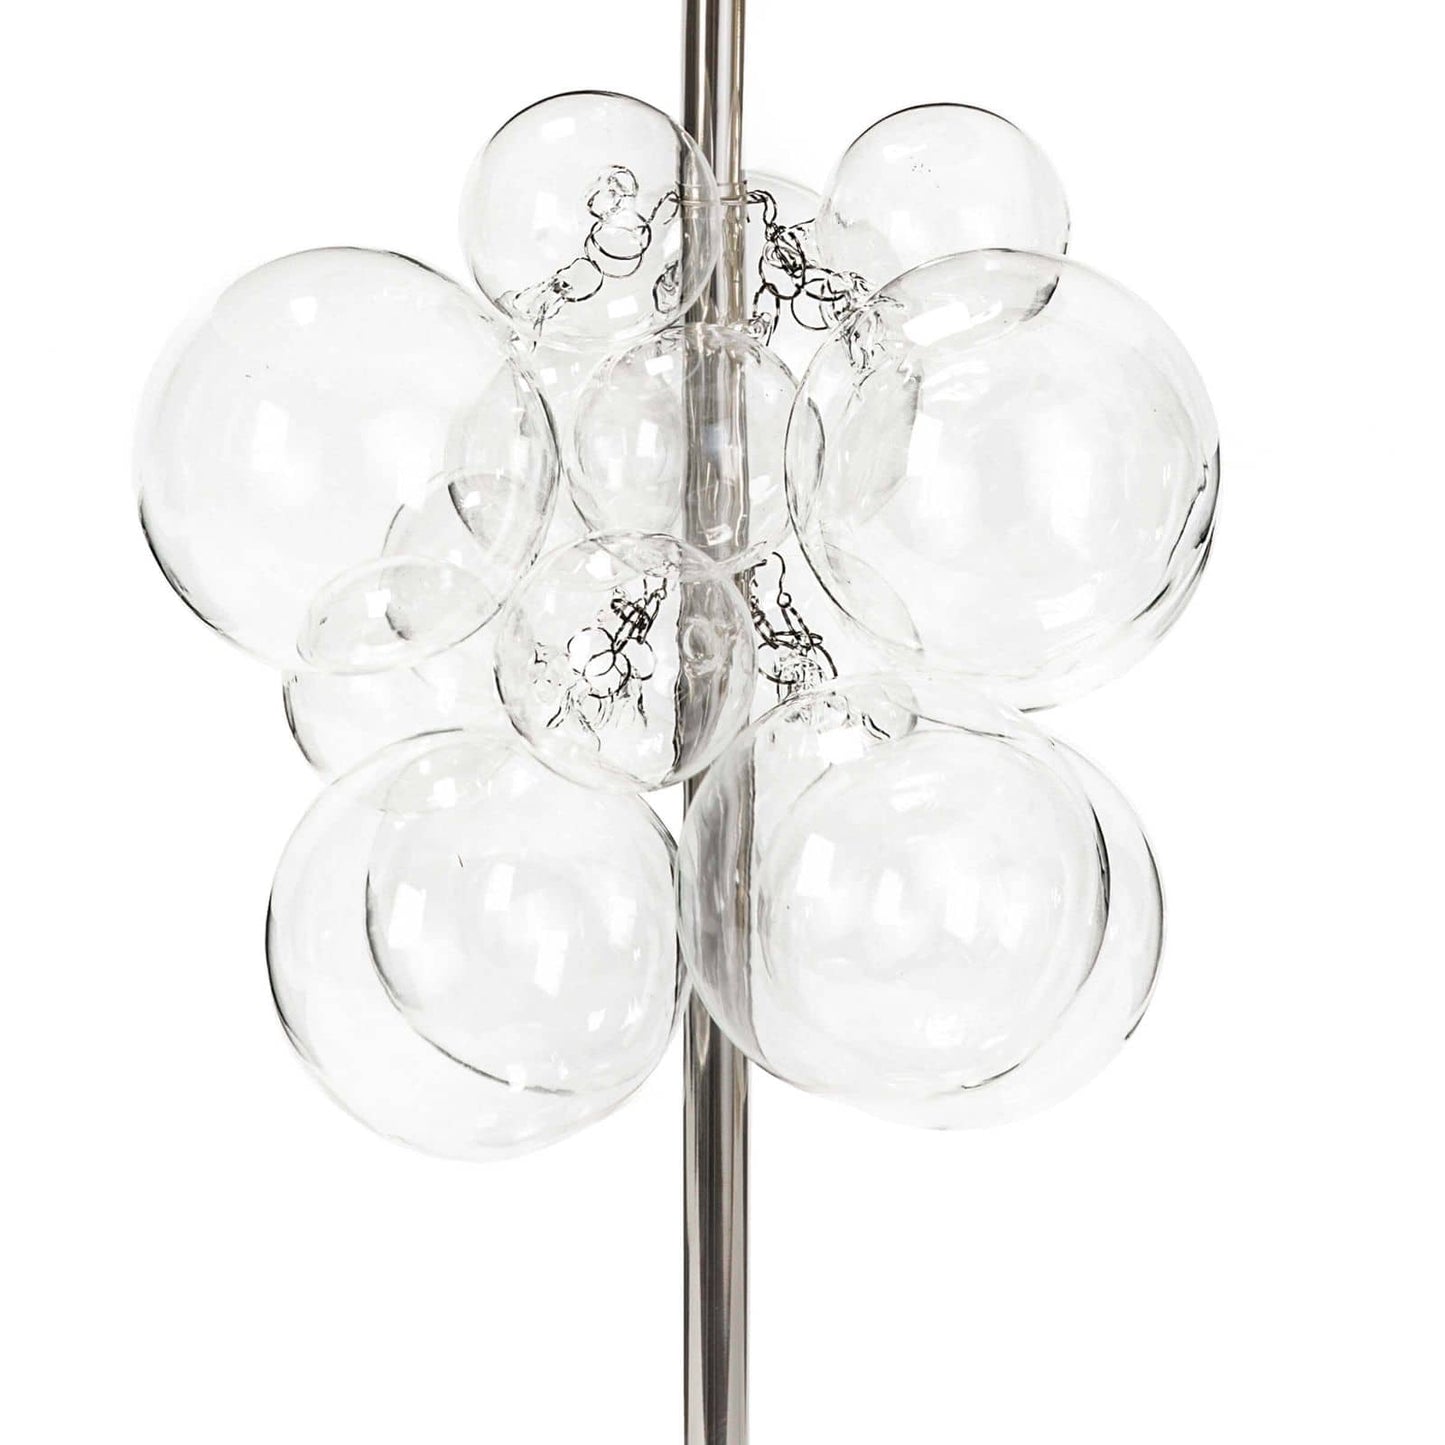 Bubbles Table Lamp in Clear by Coastal Living